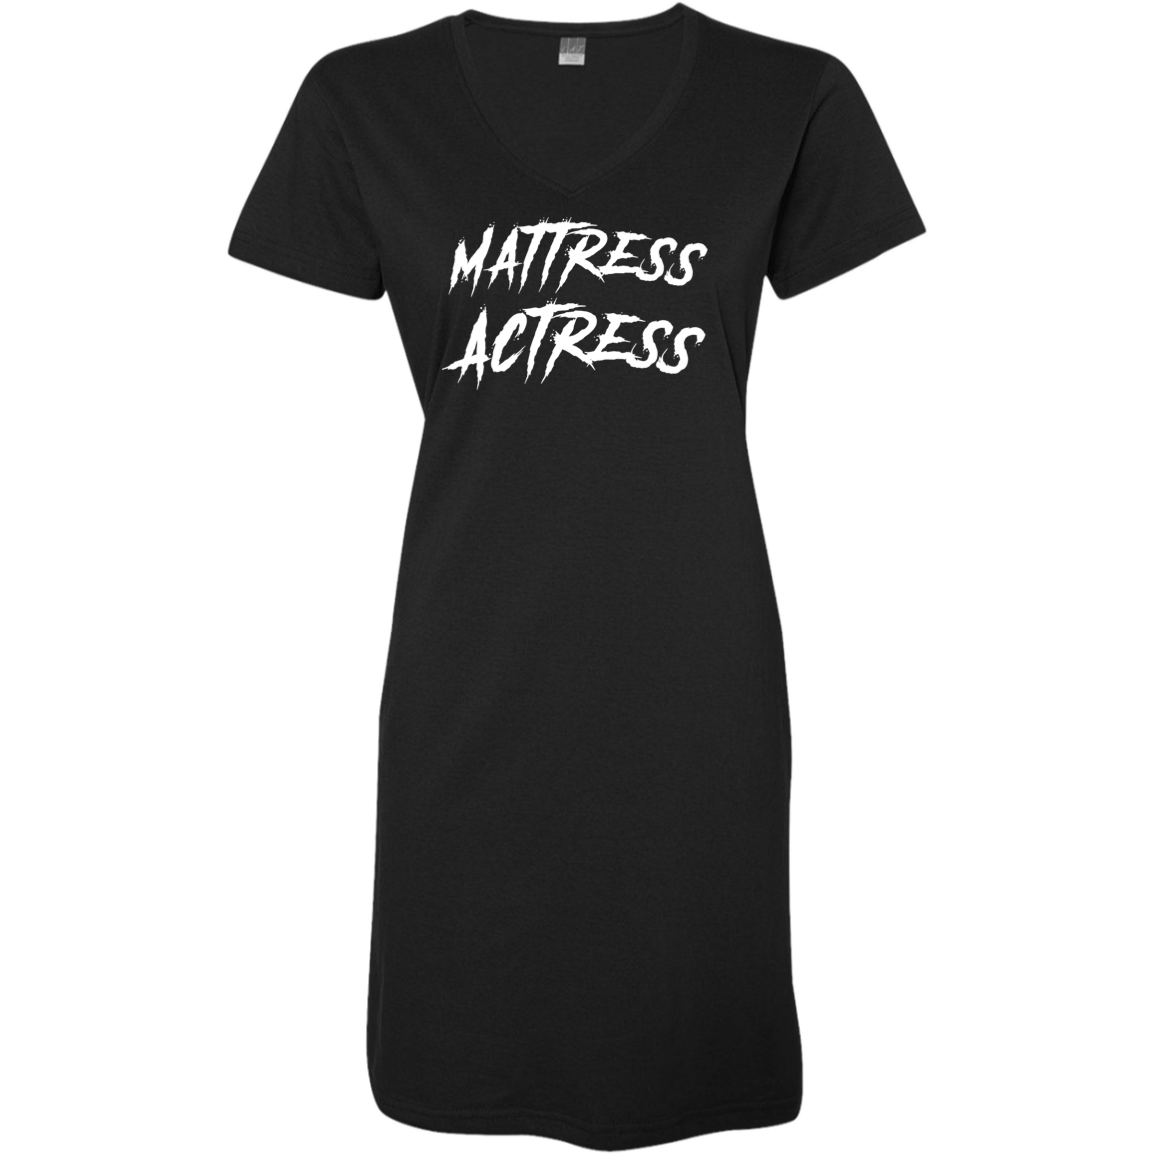 "Mattress Actress" Ladies' V-Neck Fine Jersey Cover-Up